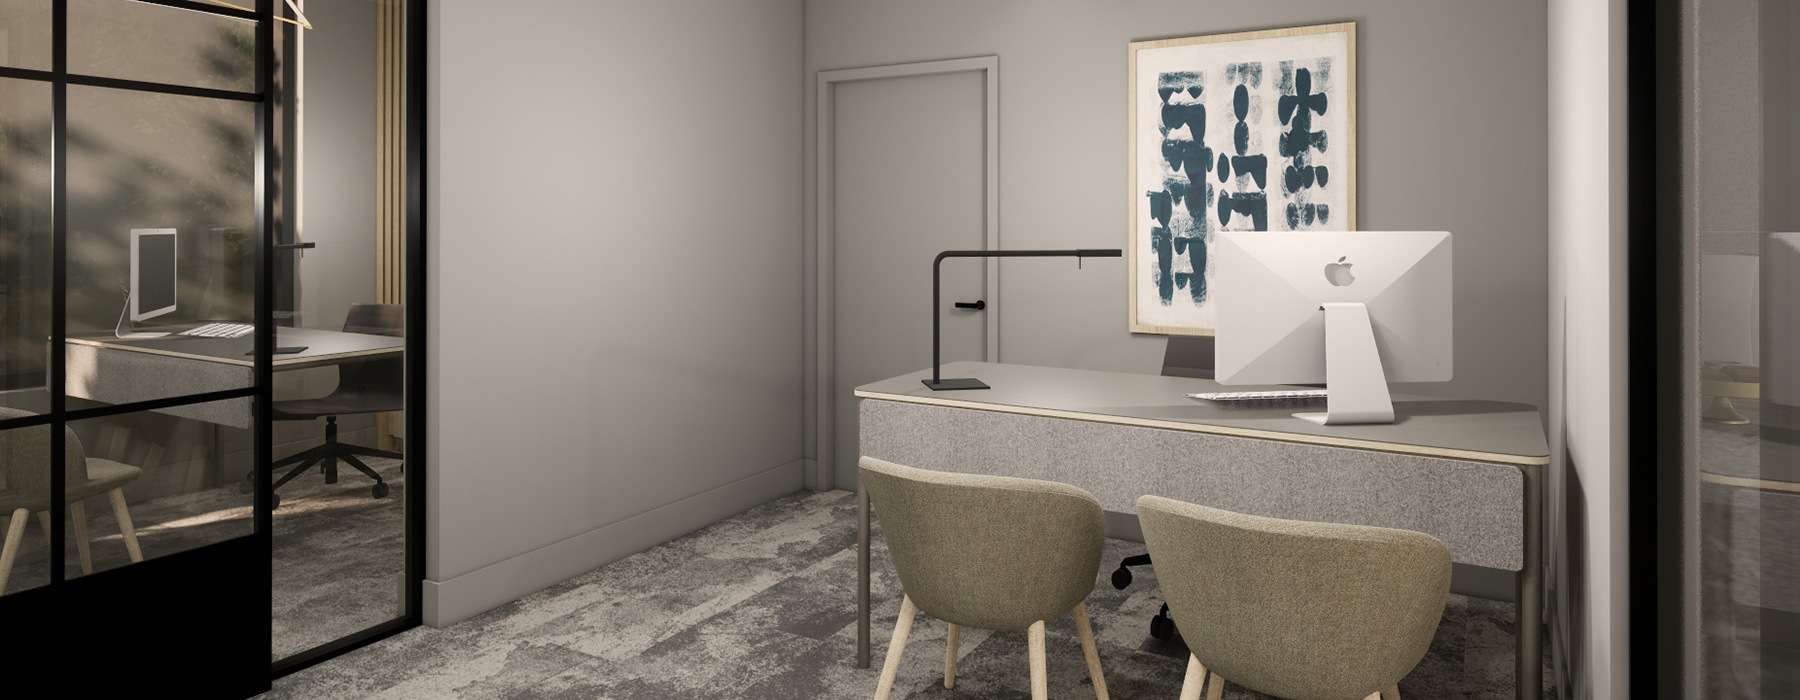 rendering of desk area with large glass enclosed walls and artwork on walls